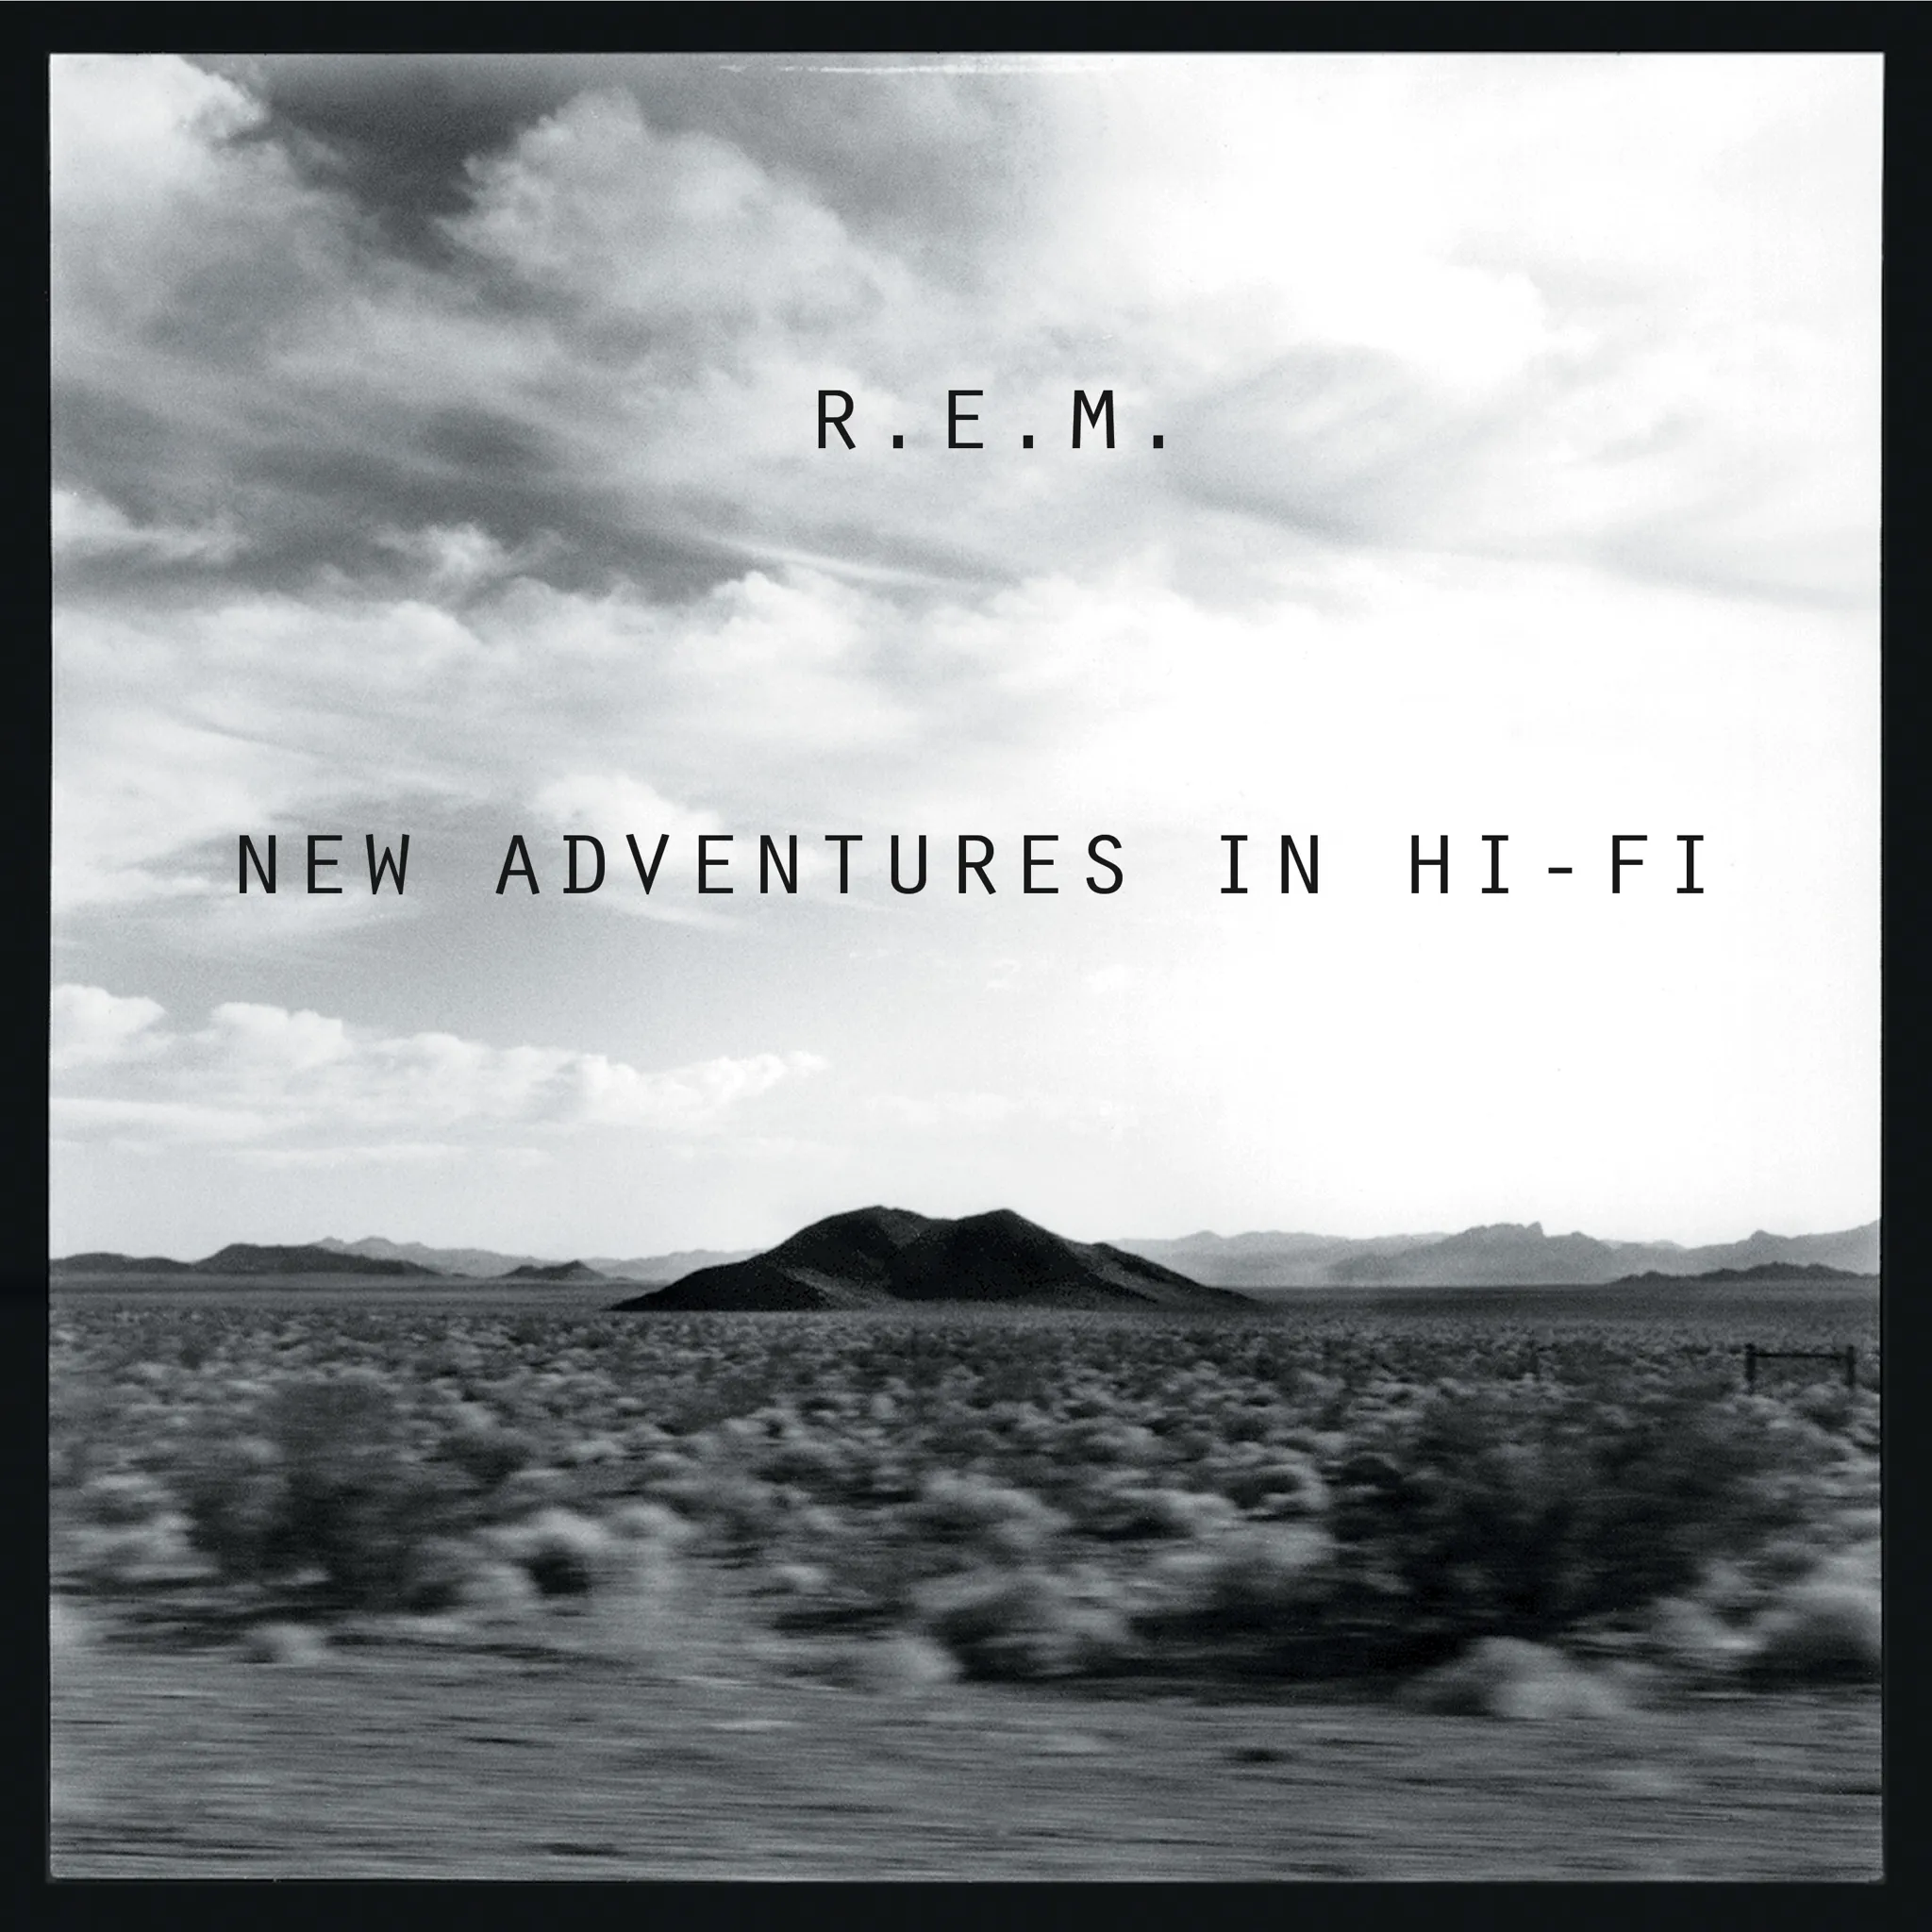 <strong>R.E.M. - New Adventures In Hi-Fi (25th Anniversary Edition)</strong> (Vinyl LP - black)